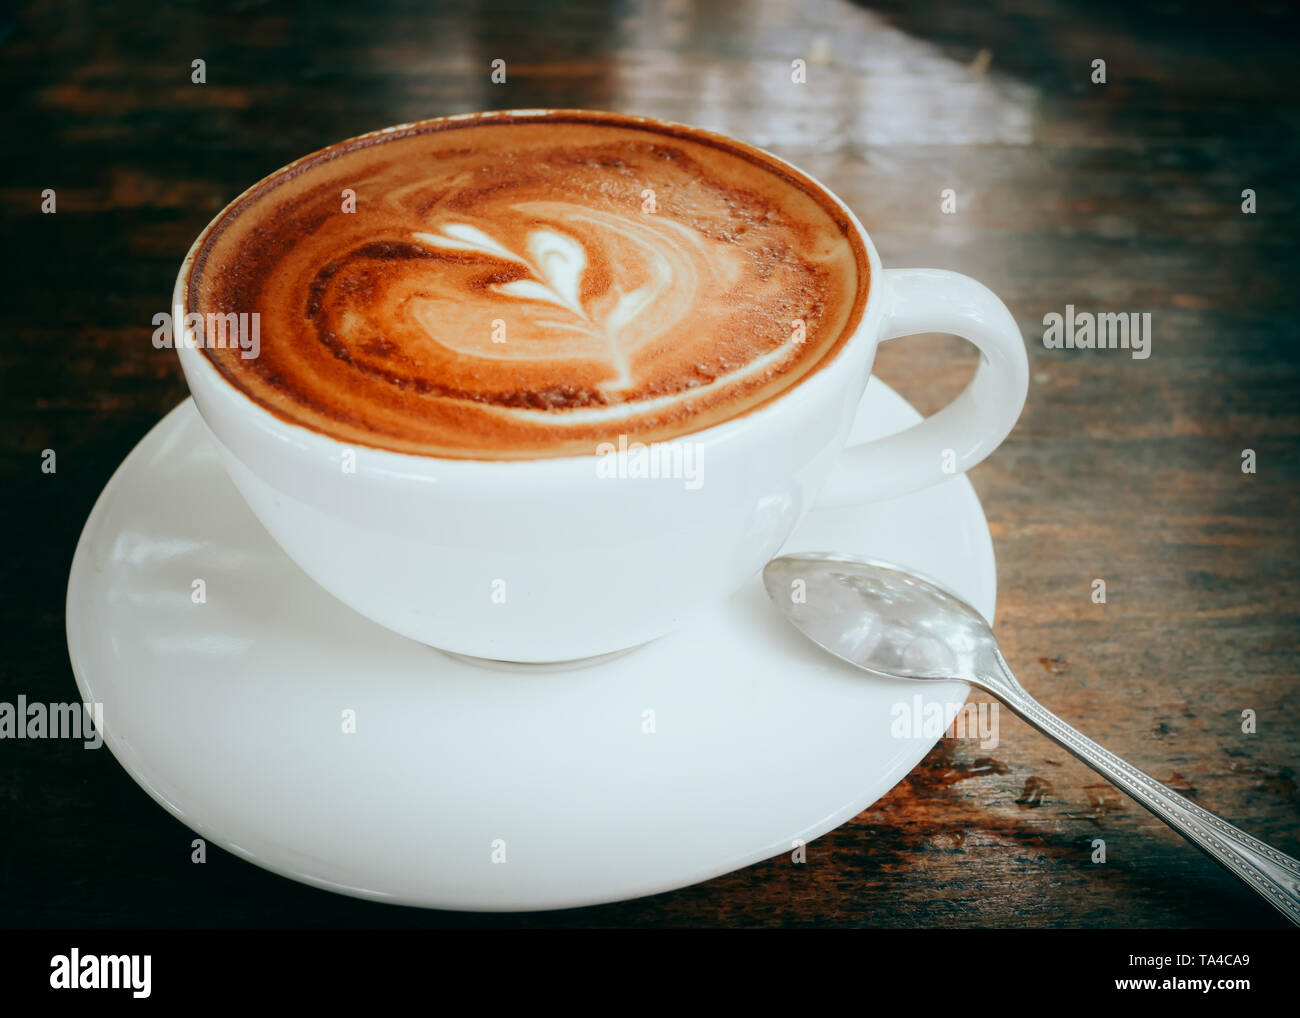 hot coffee latte art on wood table background close up. Stock Photo